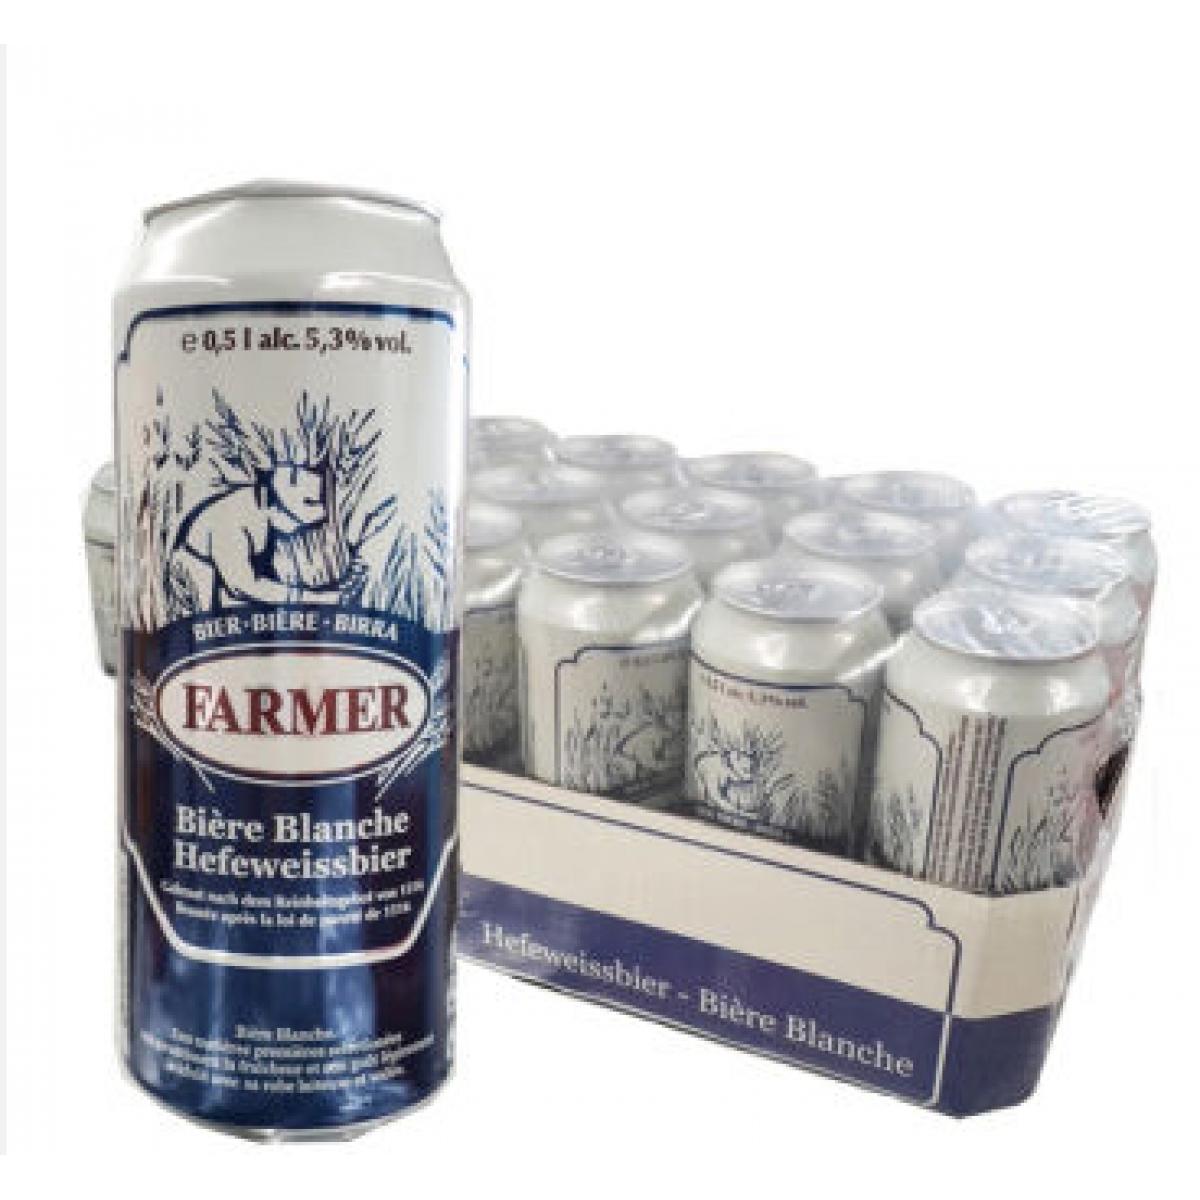 Purchase Farmer Wheat and White Beer